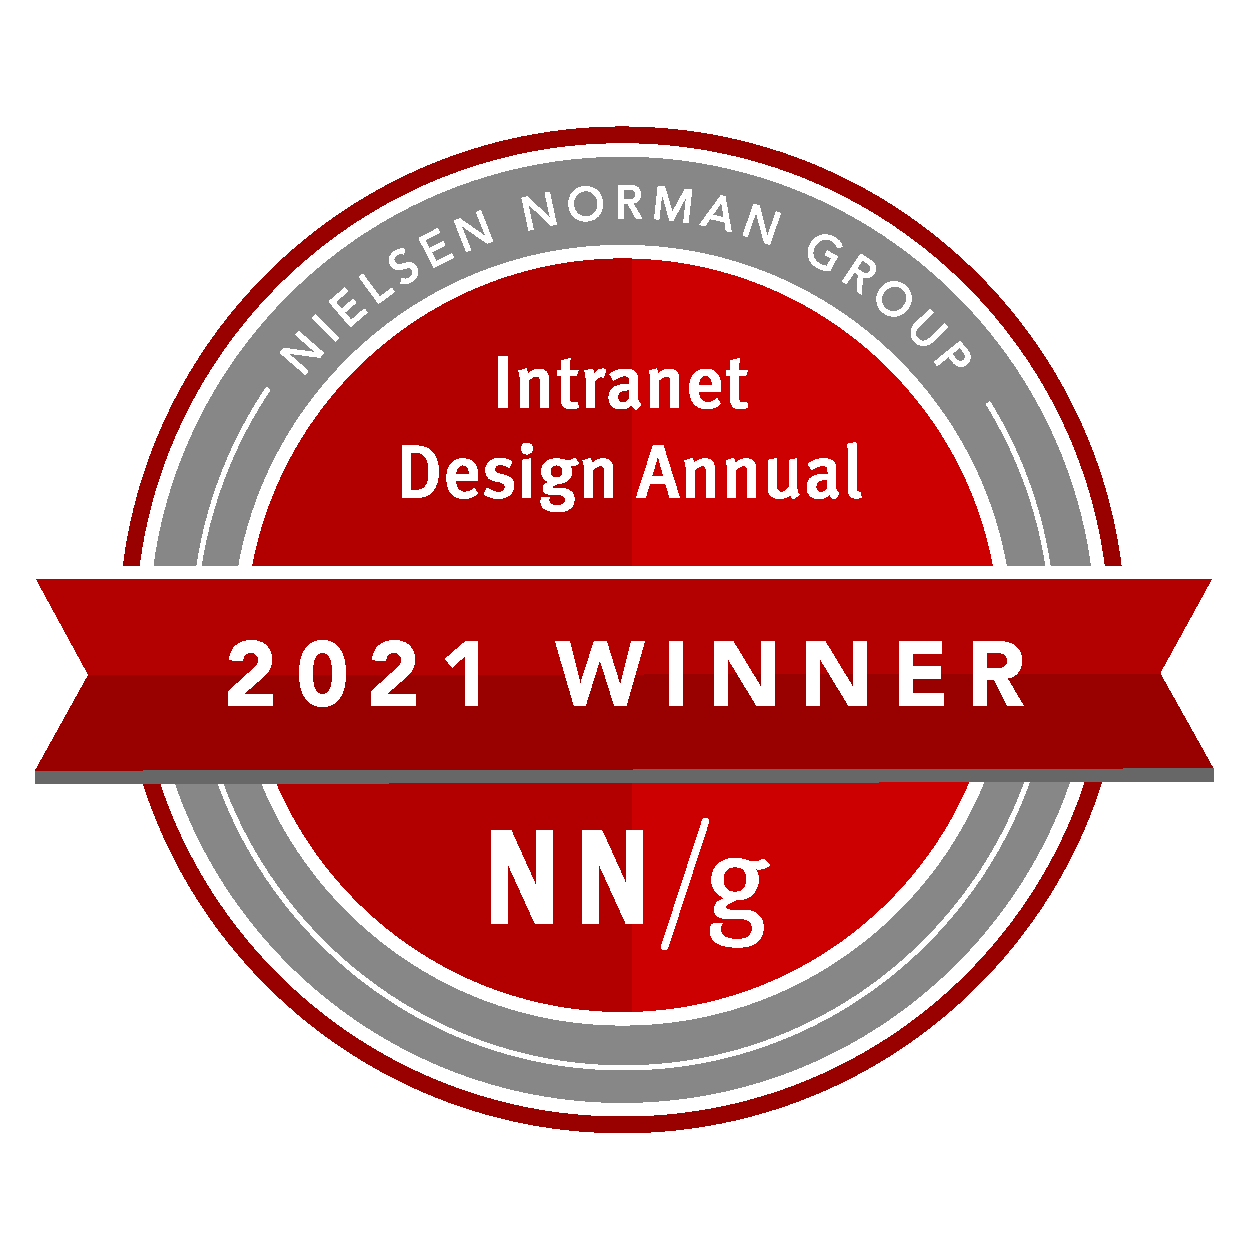 Attollo Intranet won Best Intranet 2021 at the NNG Awards